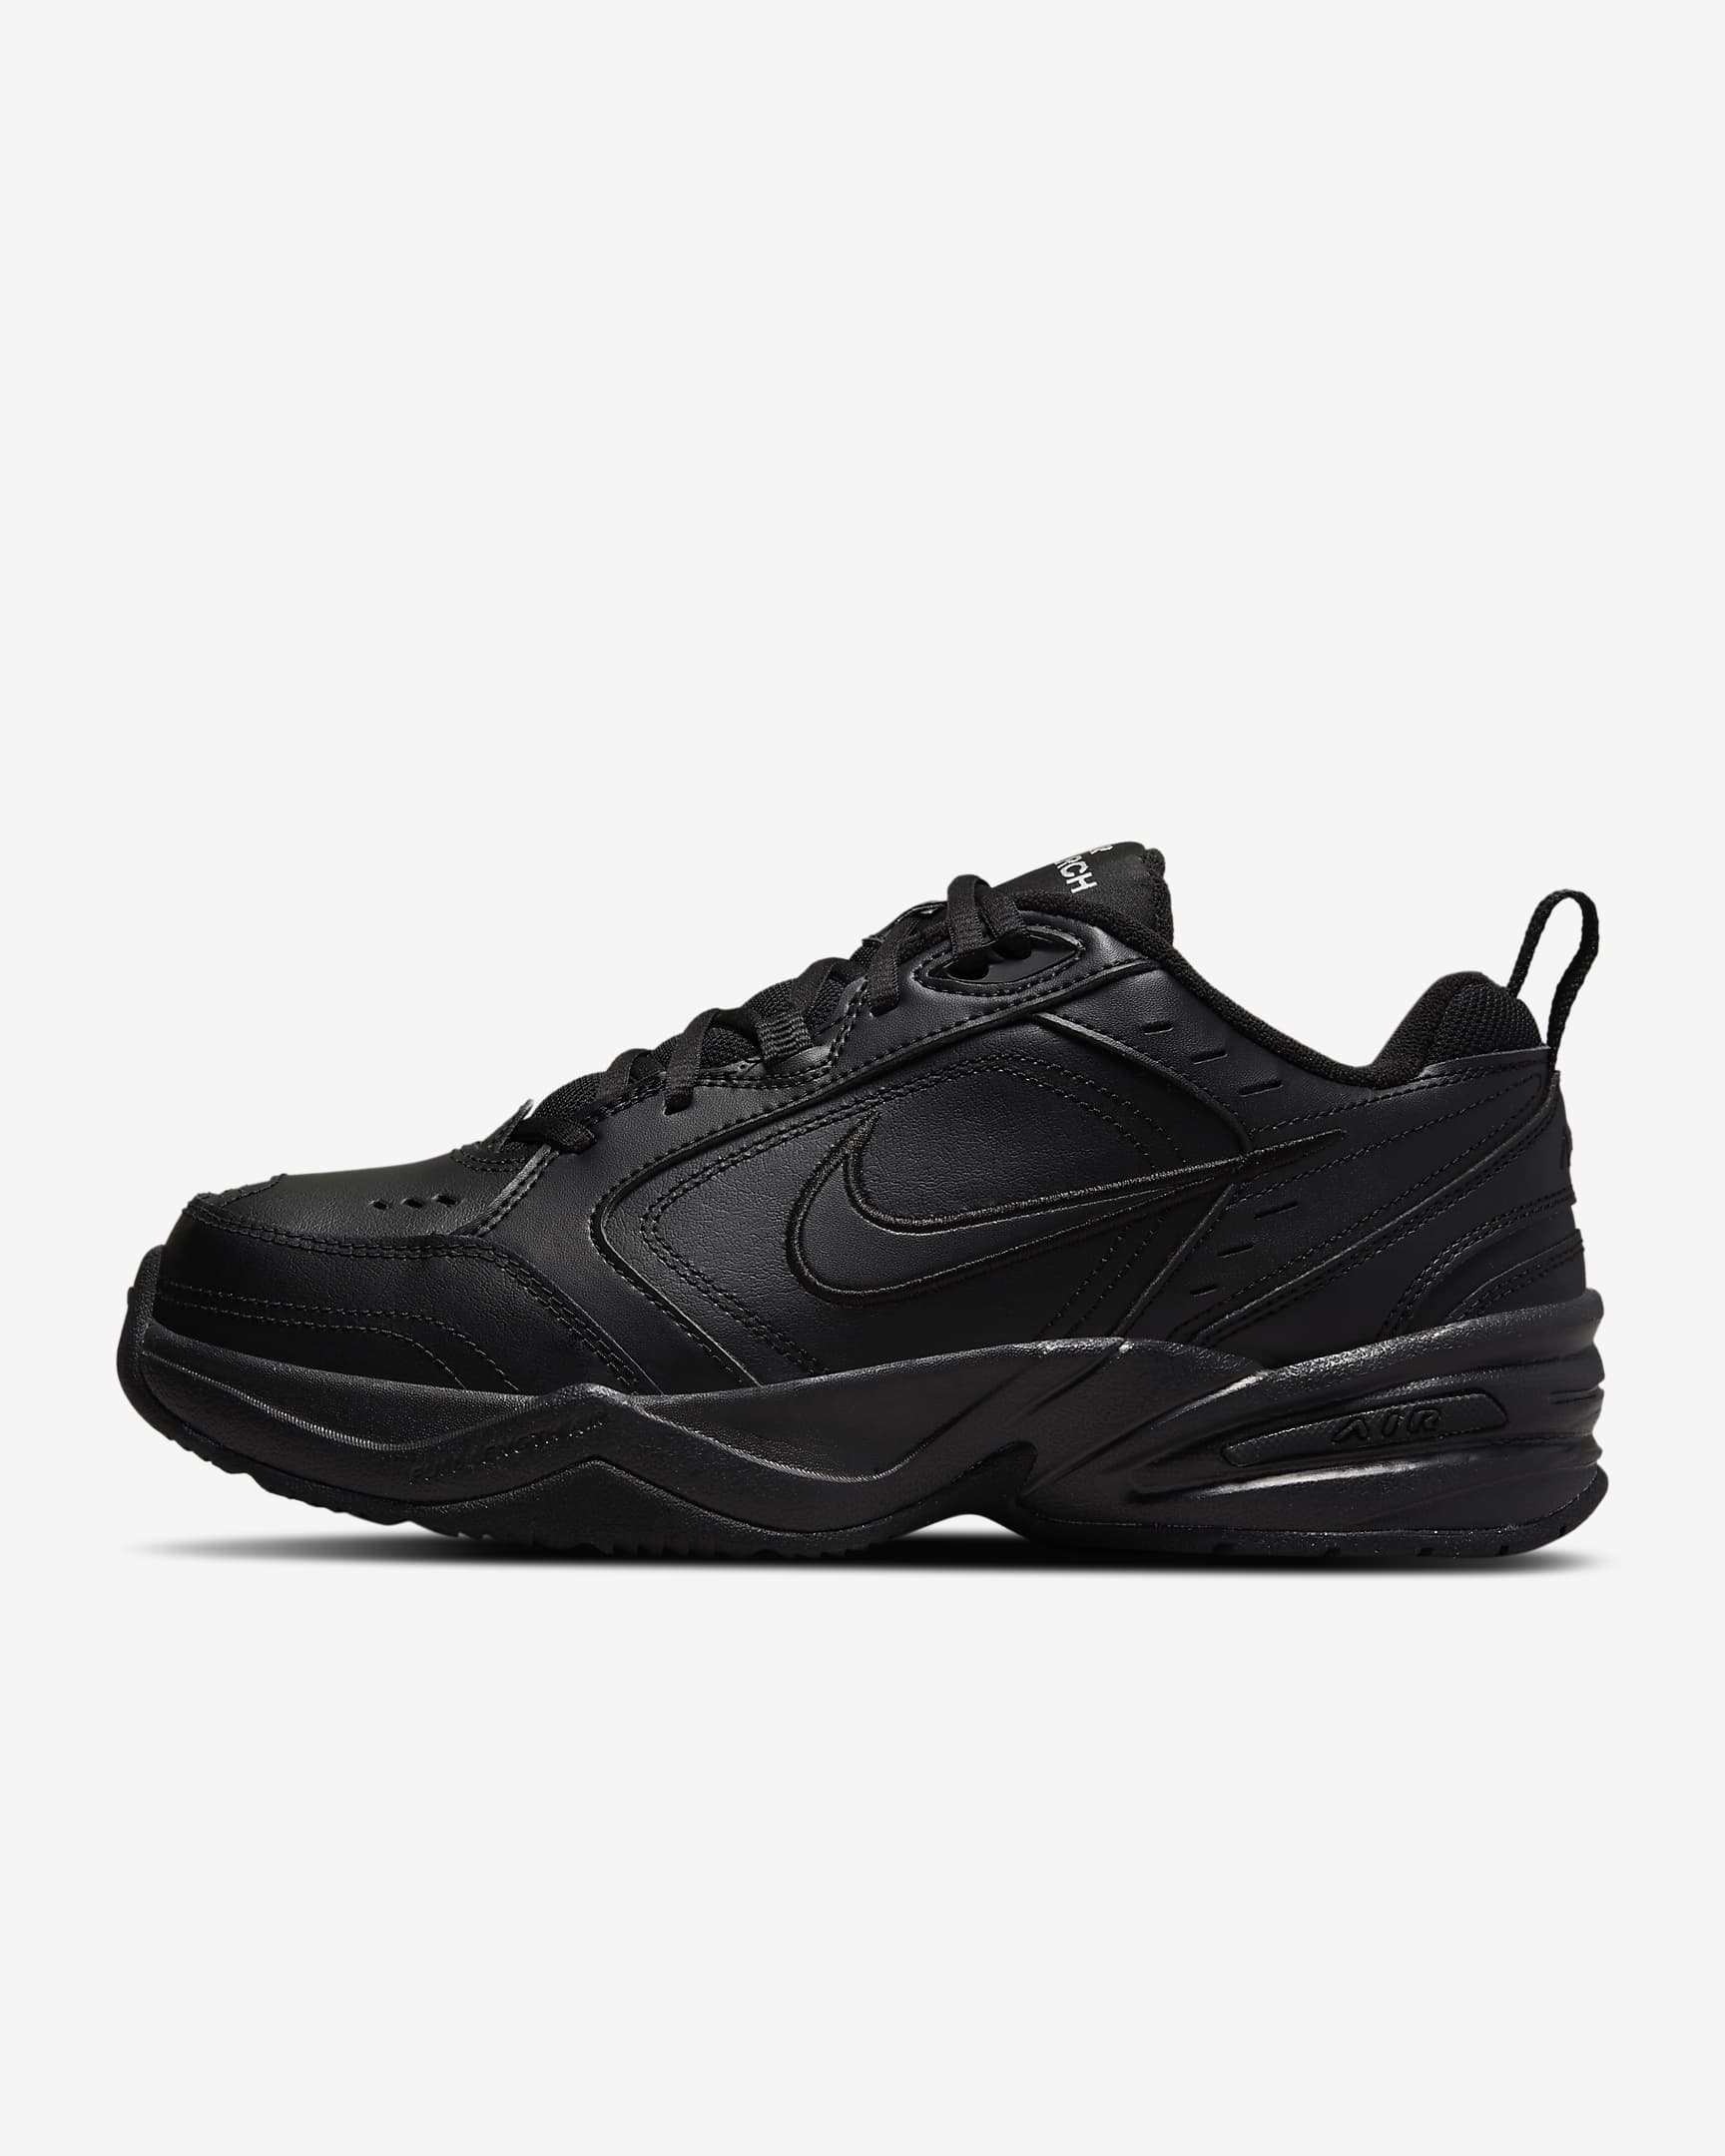 Nike Air Monarch IV Men's Workout Shoes (Extra Wide). Nike NL